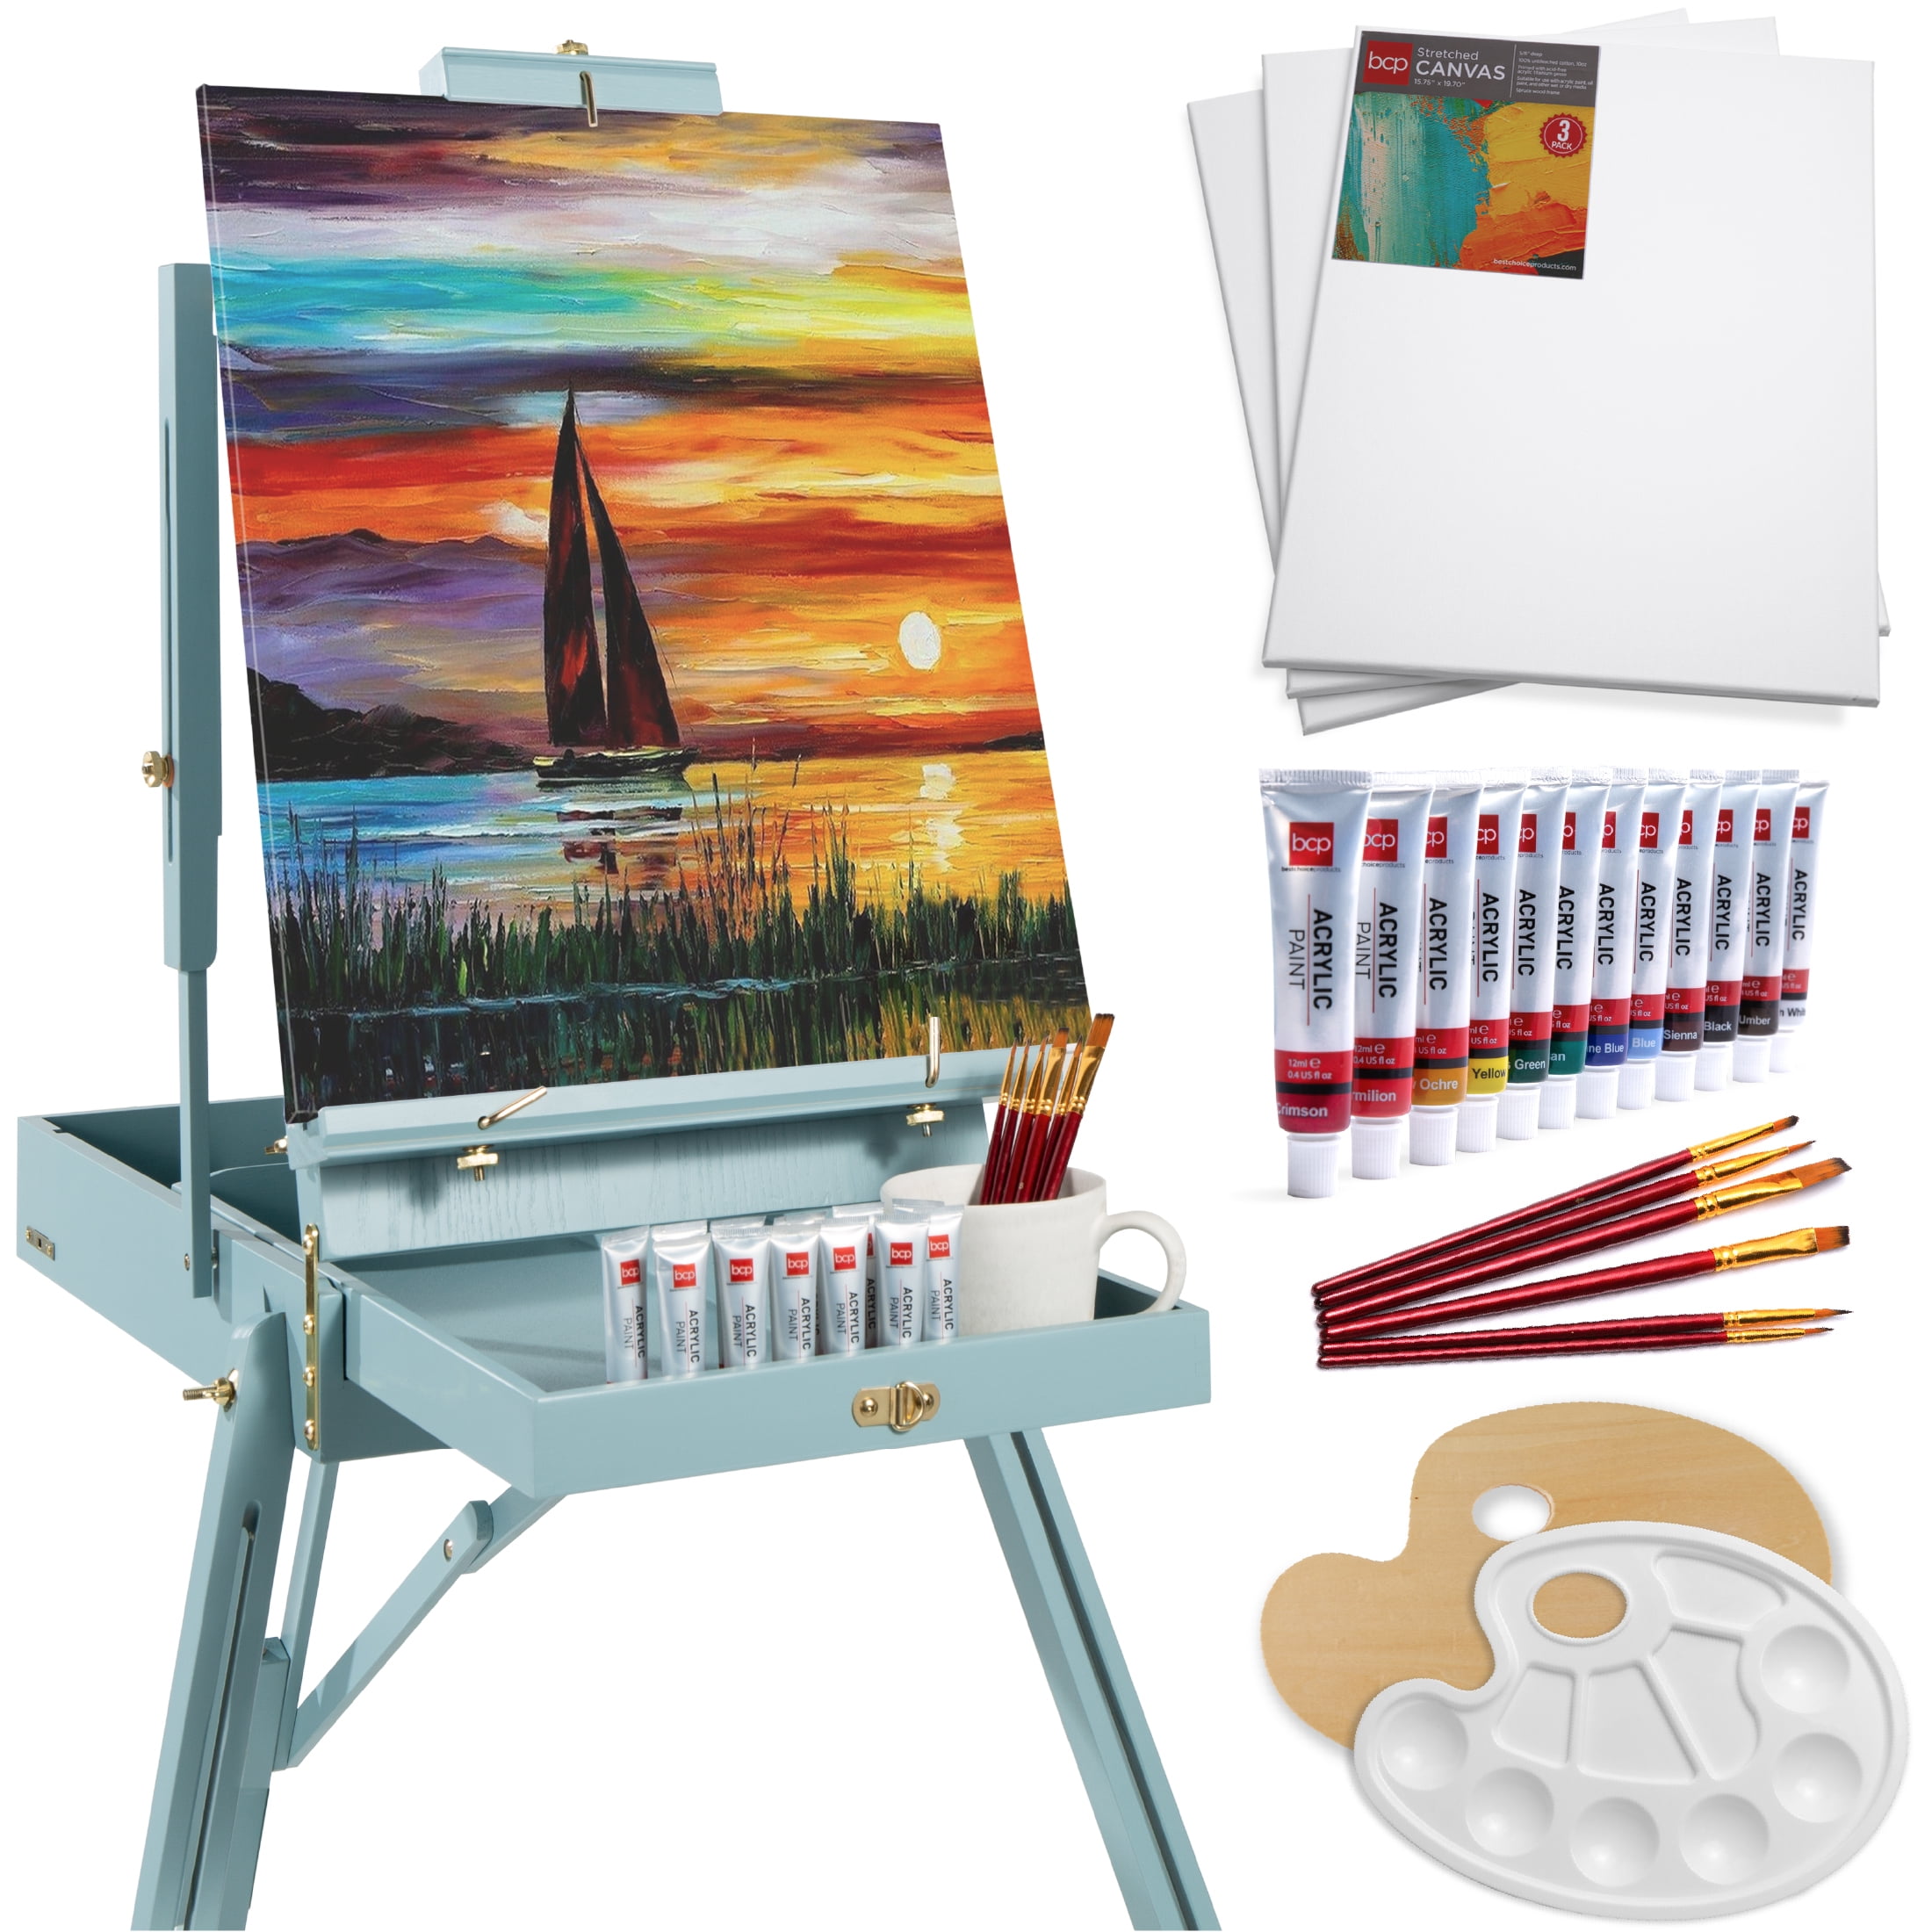 DESIGN DELIGHTS WOODEN SKETCH EASEL field easel for stretched artist canvas 180cm ready for use